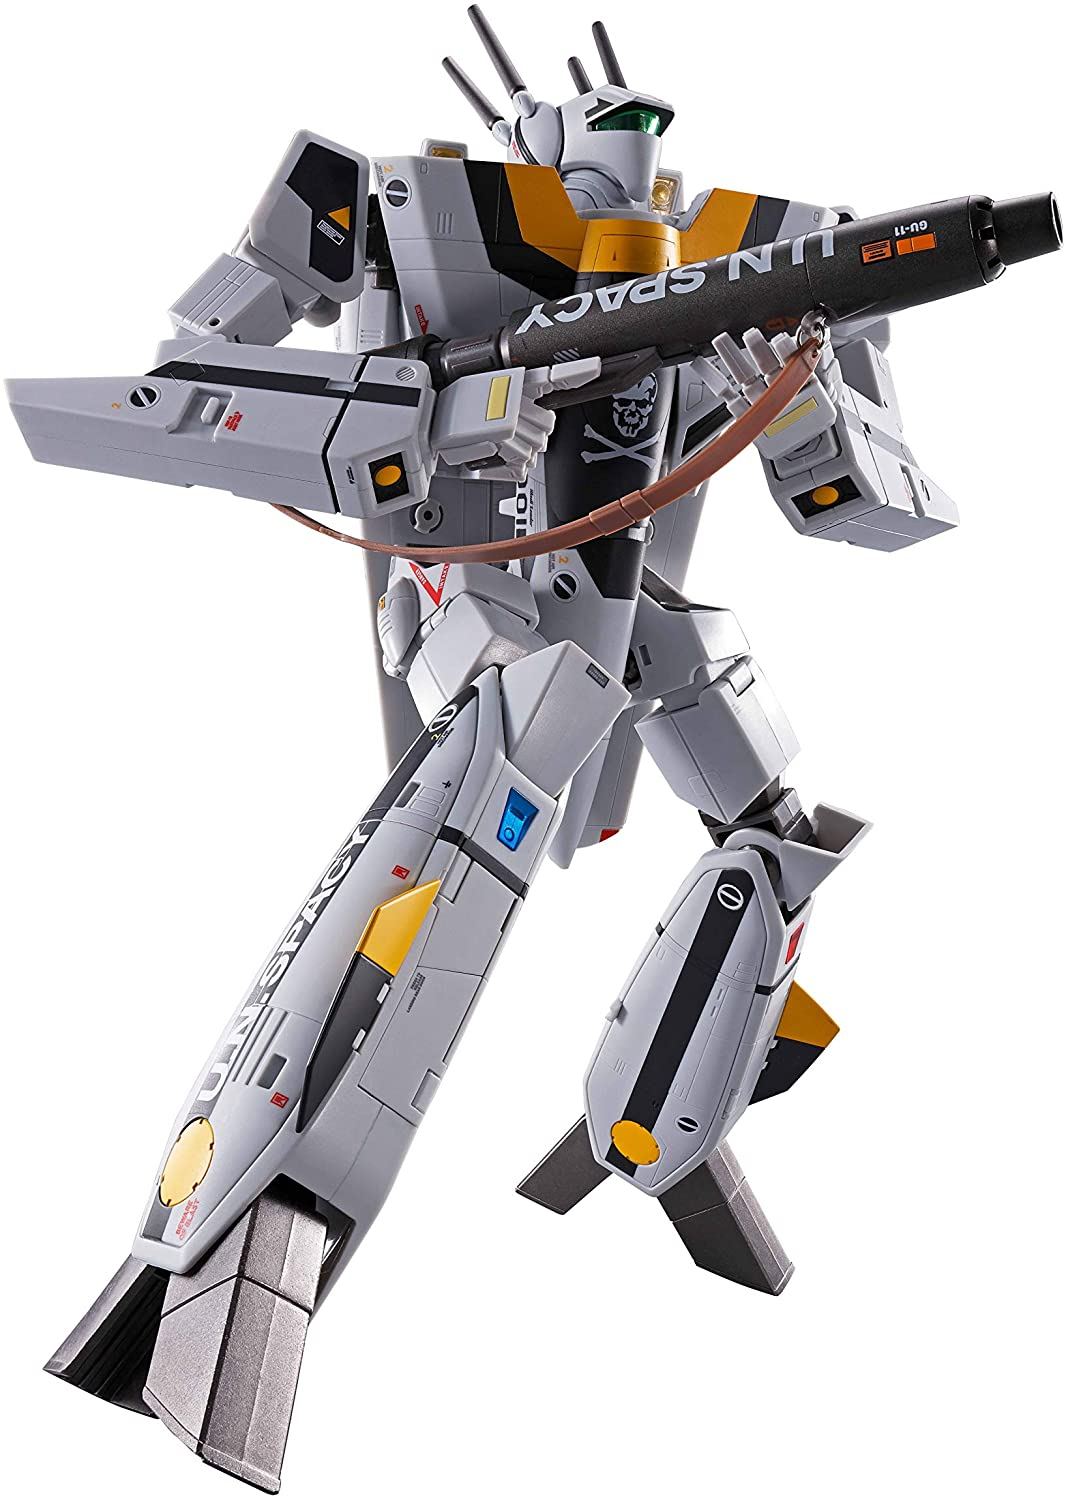 DX CHOGOKIN THE SUPER DIMENSION FORTRESS MACROSS: FIRST LIMITED EDITION VF-1S VALKYRIE ROY FOCKER SPECIAL Tamashii (Bandai Toys)